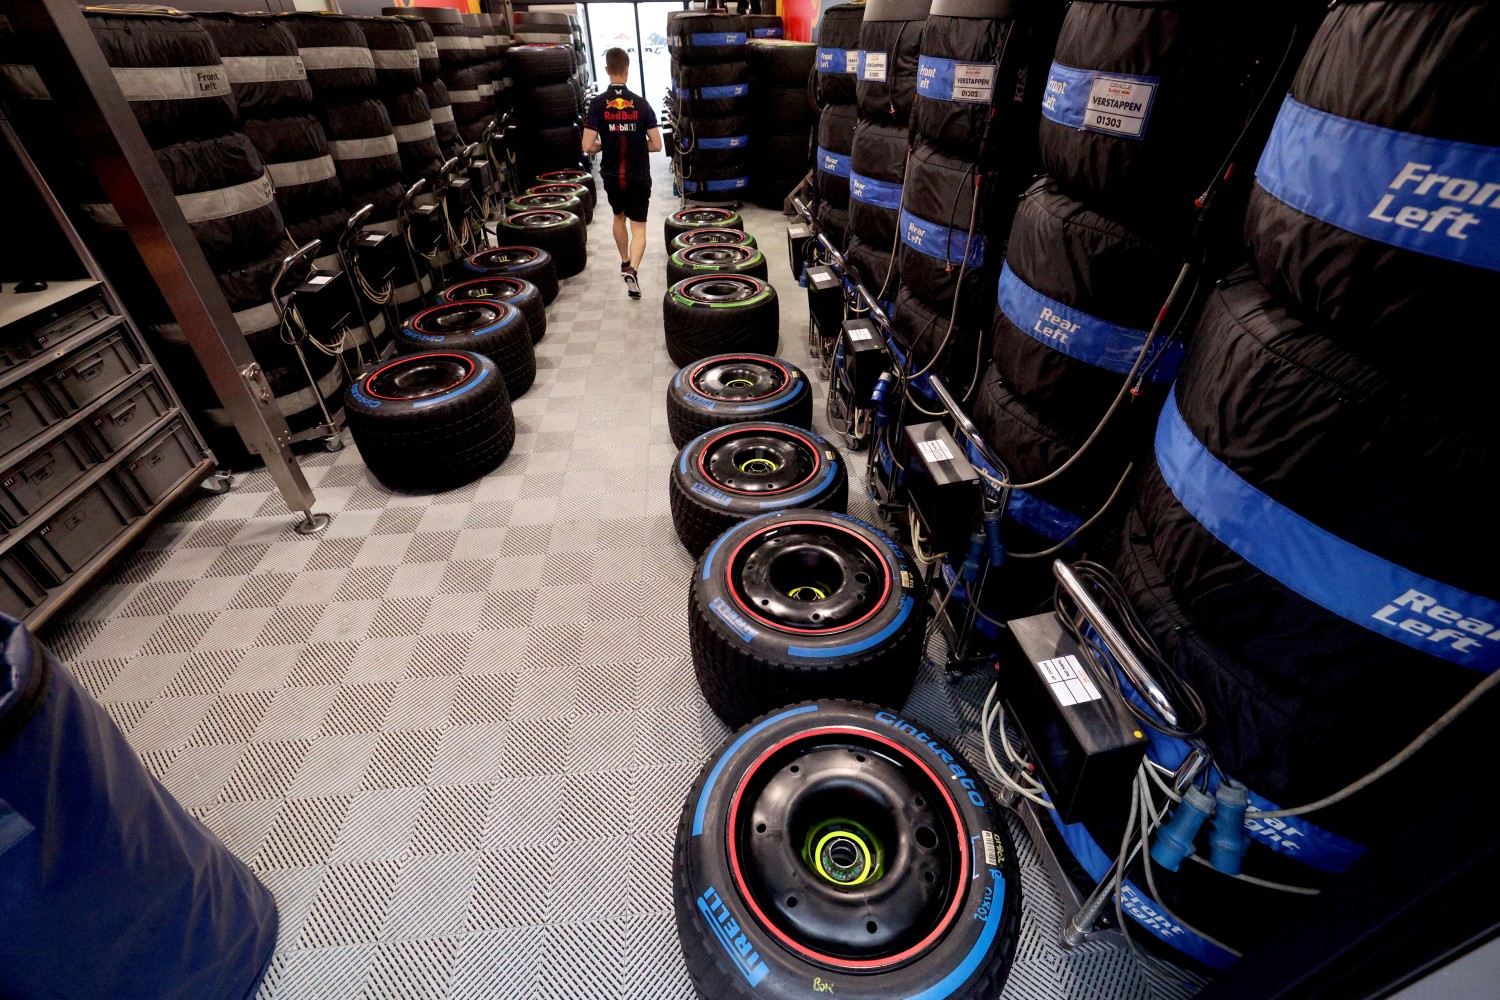 Wet tires are seen in the Red Bull Racing garage during previews ahead of the F1 Grand Prix of The Netherlands at Circuit Zandvoort on August 24, 2023 in Zandvoort, Netherlands. (Photo by Dean Mouhtaropoulos/Getty Images) // Getty Images / Red Bull Content Pool // SI202308240529 // Usage for editorial use only //